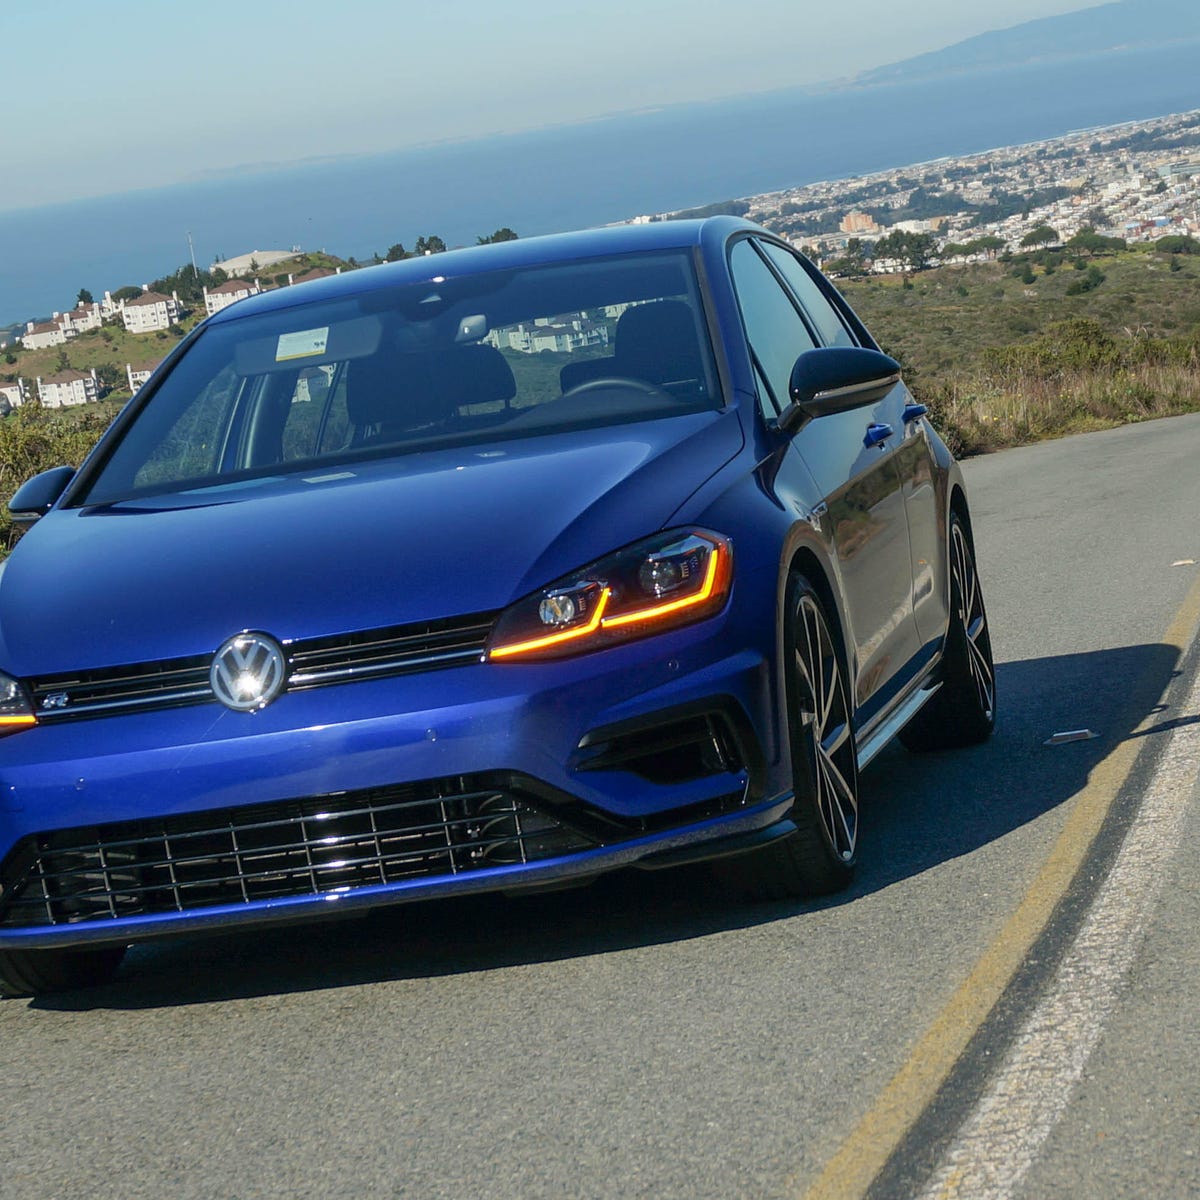 2018 Volkswagen Golf R review: ratings, specs, photos, price and more - CNET